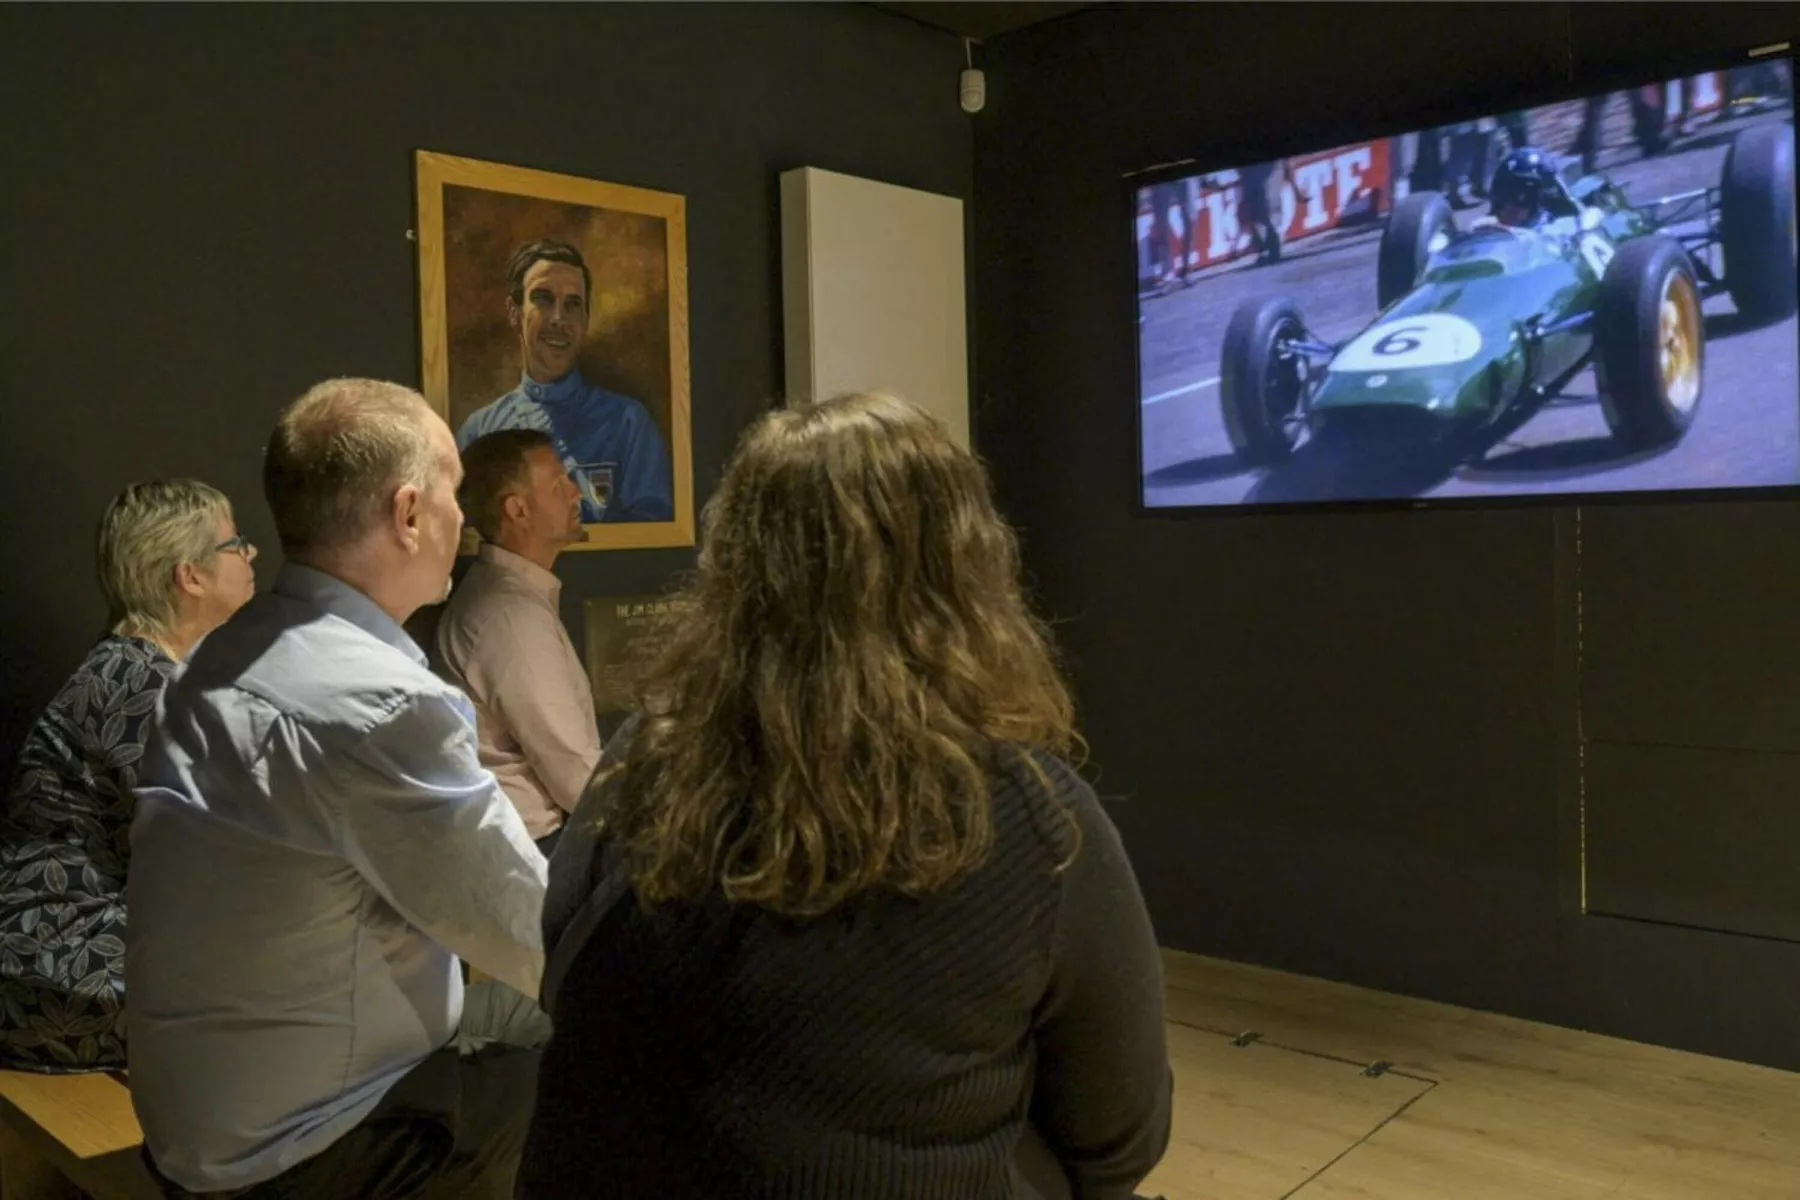 Inside a cinema area at the Jim Clark Motorsport Museum. Visitors watch a film with footage of racing.